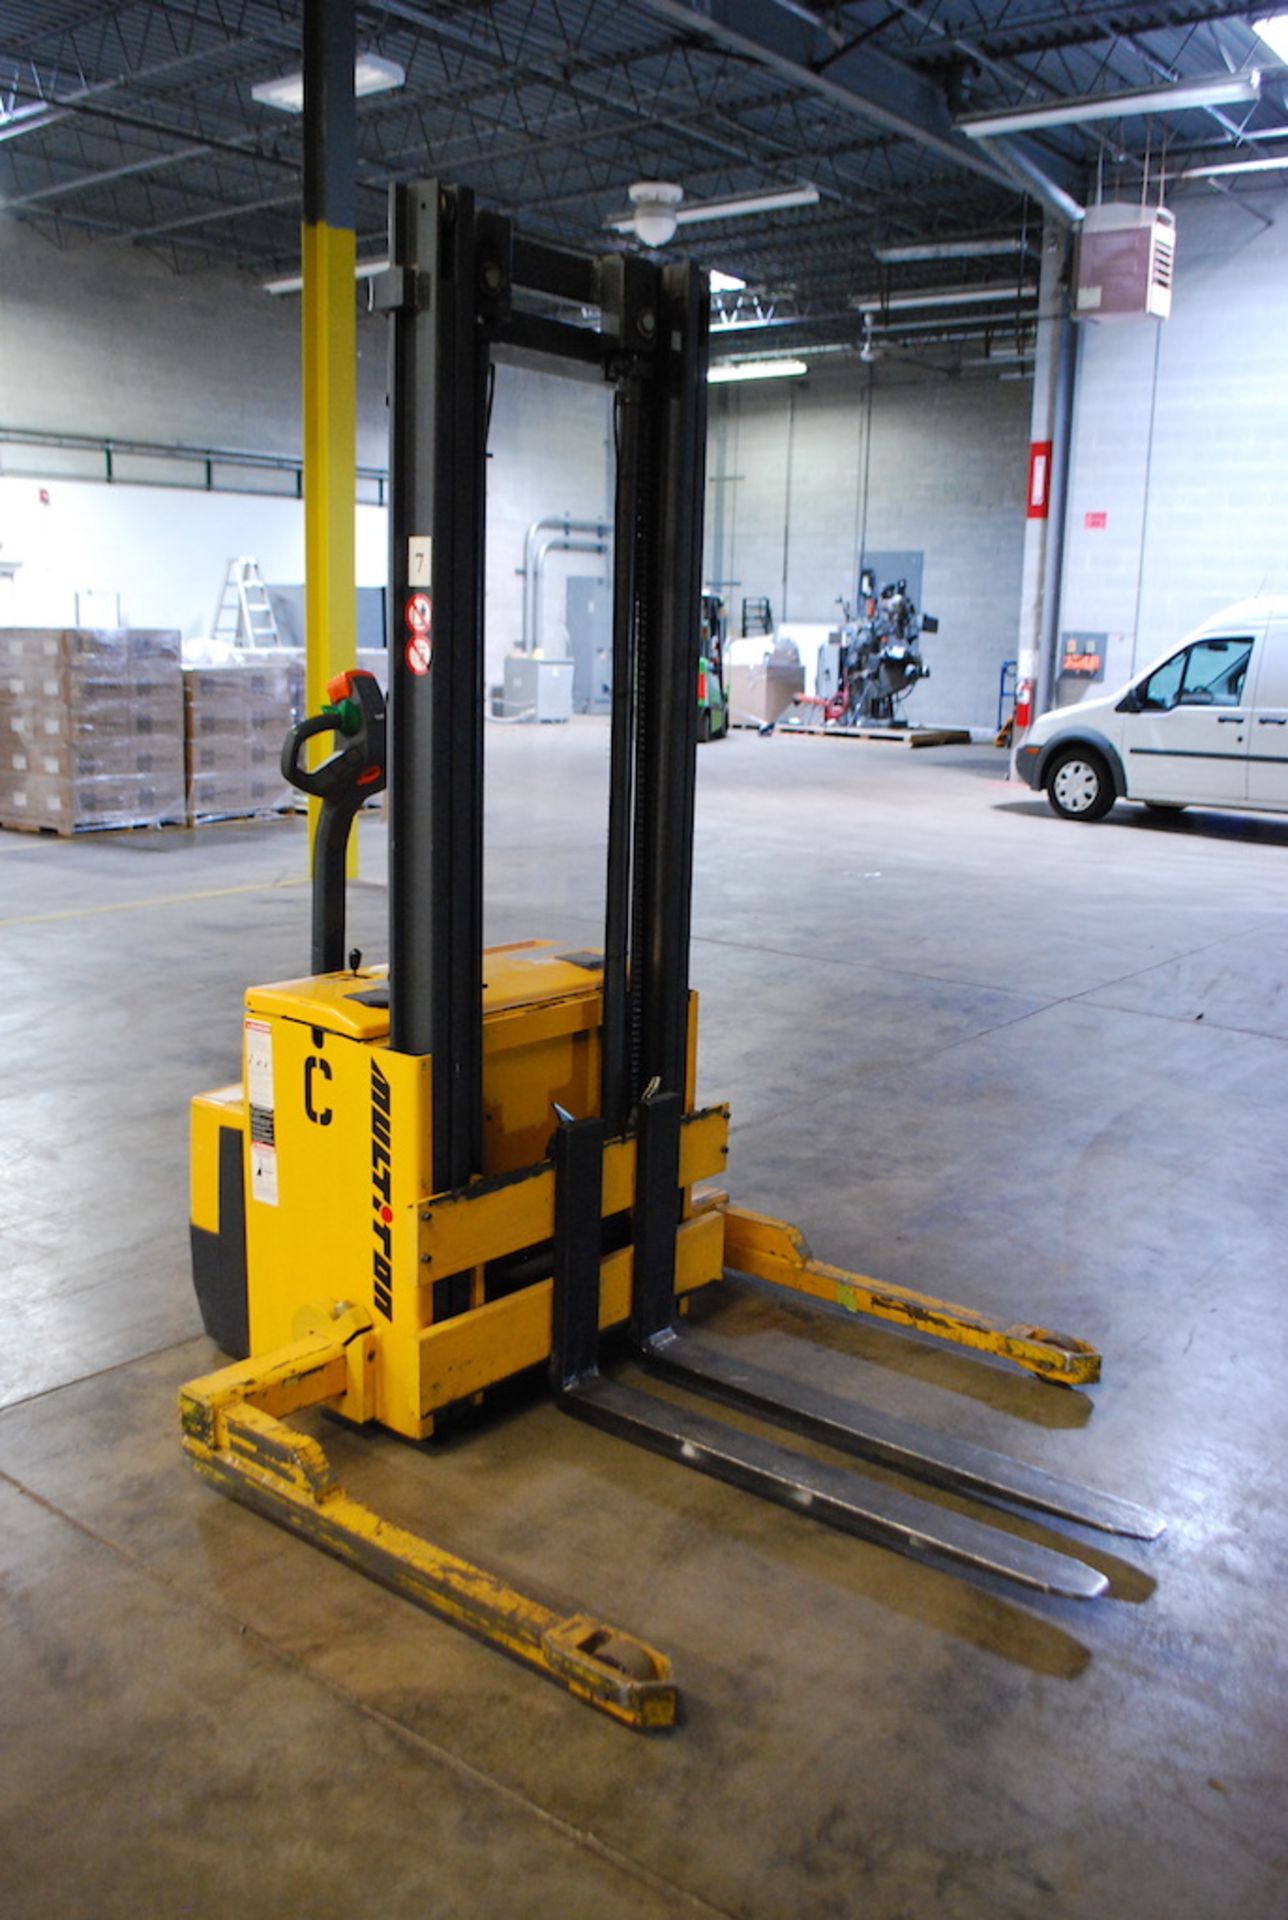 MULTITON 2200 LB. CAP. MODEL SW22-130 WALK BEHIND ELECTRIC FORK LIFT TRUCK: S/N 0184A01034597201 ( - Image 3 of 6